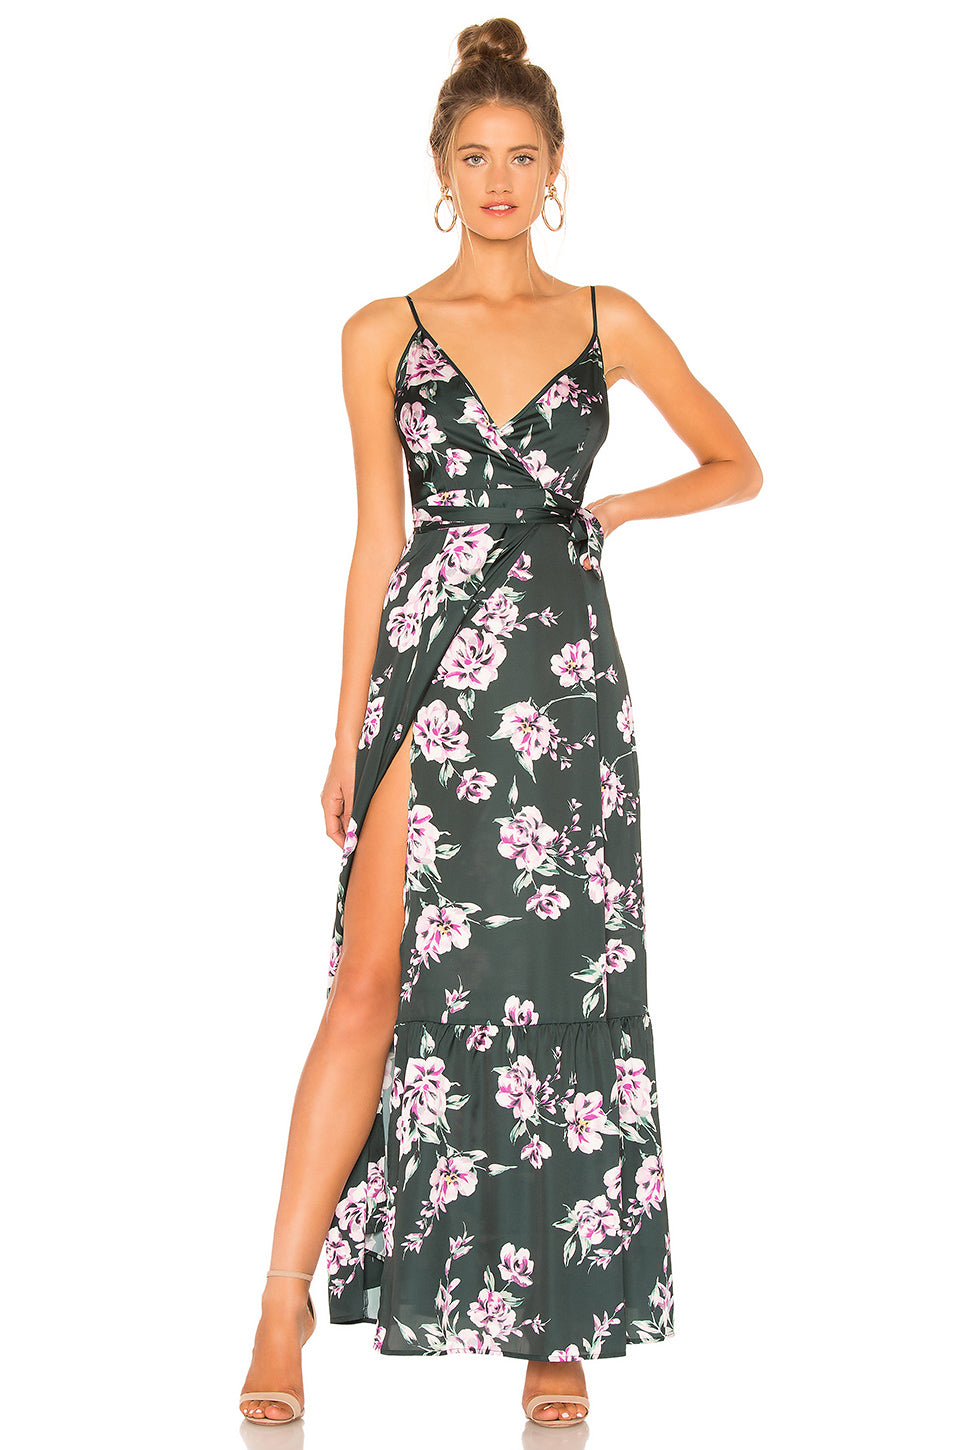 Aubrie Dress in HUNTER GREEN FLORAL